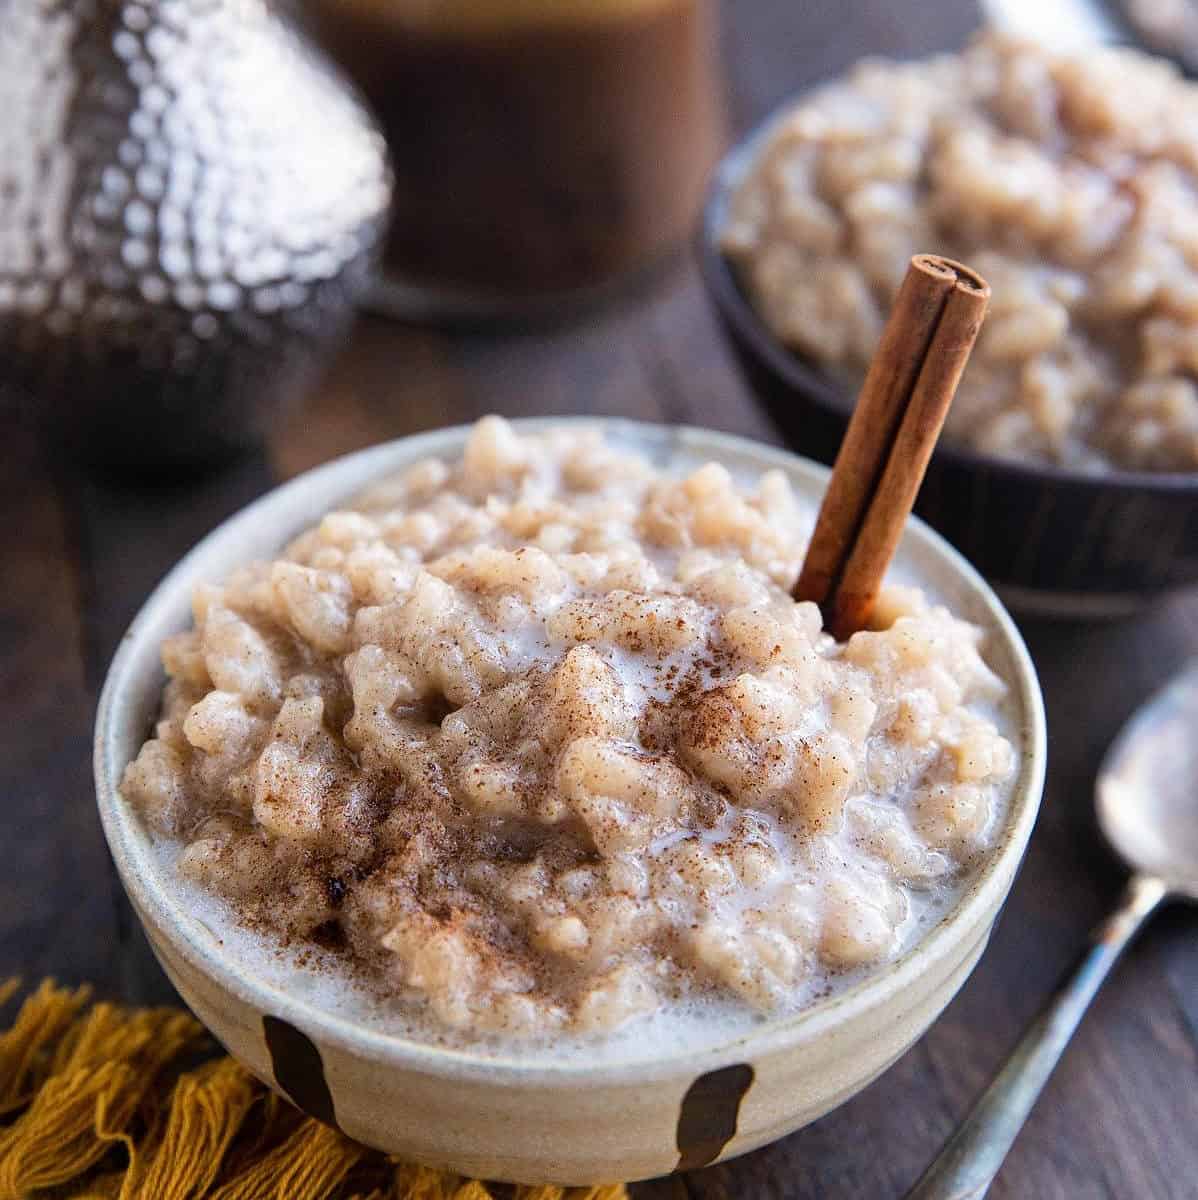  A humble bowl of rice pudding becomes a delightful dessert with maple syrup and vegan milk.